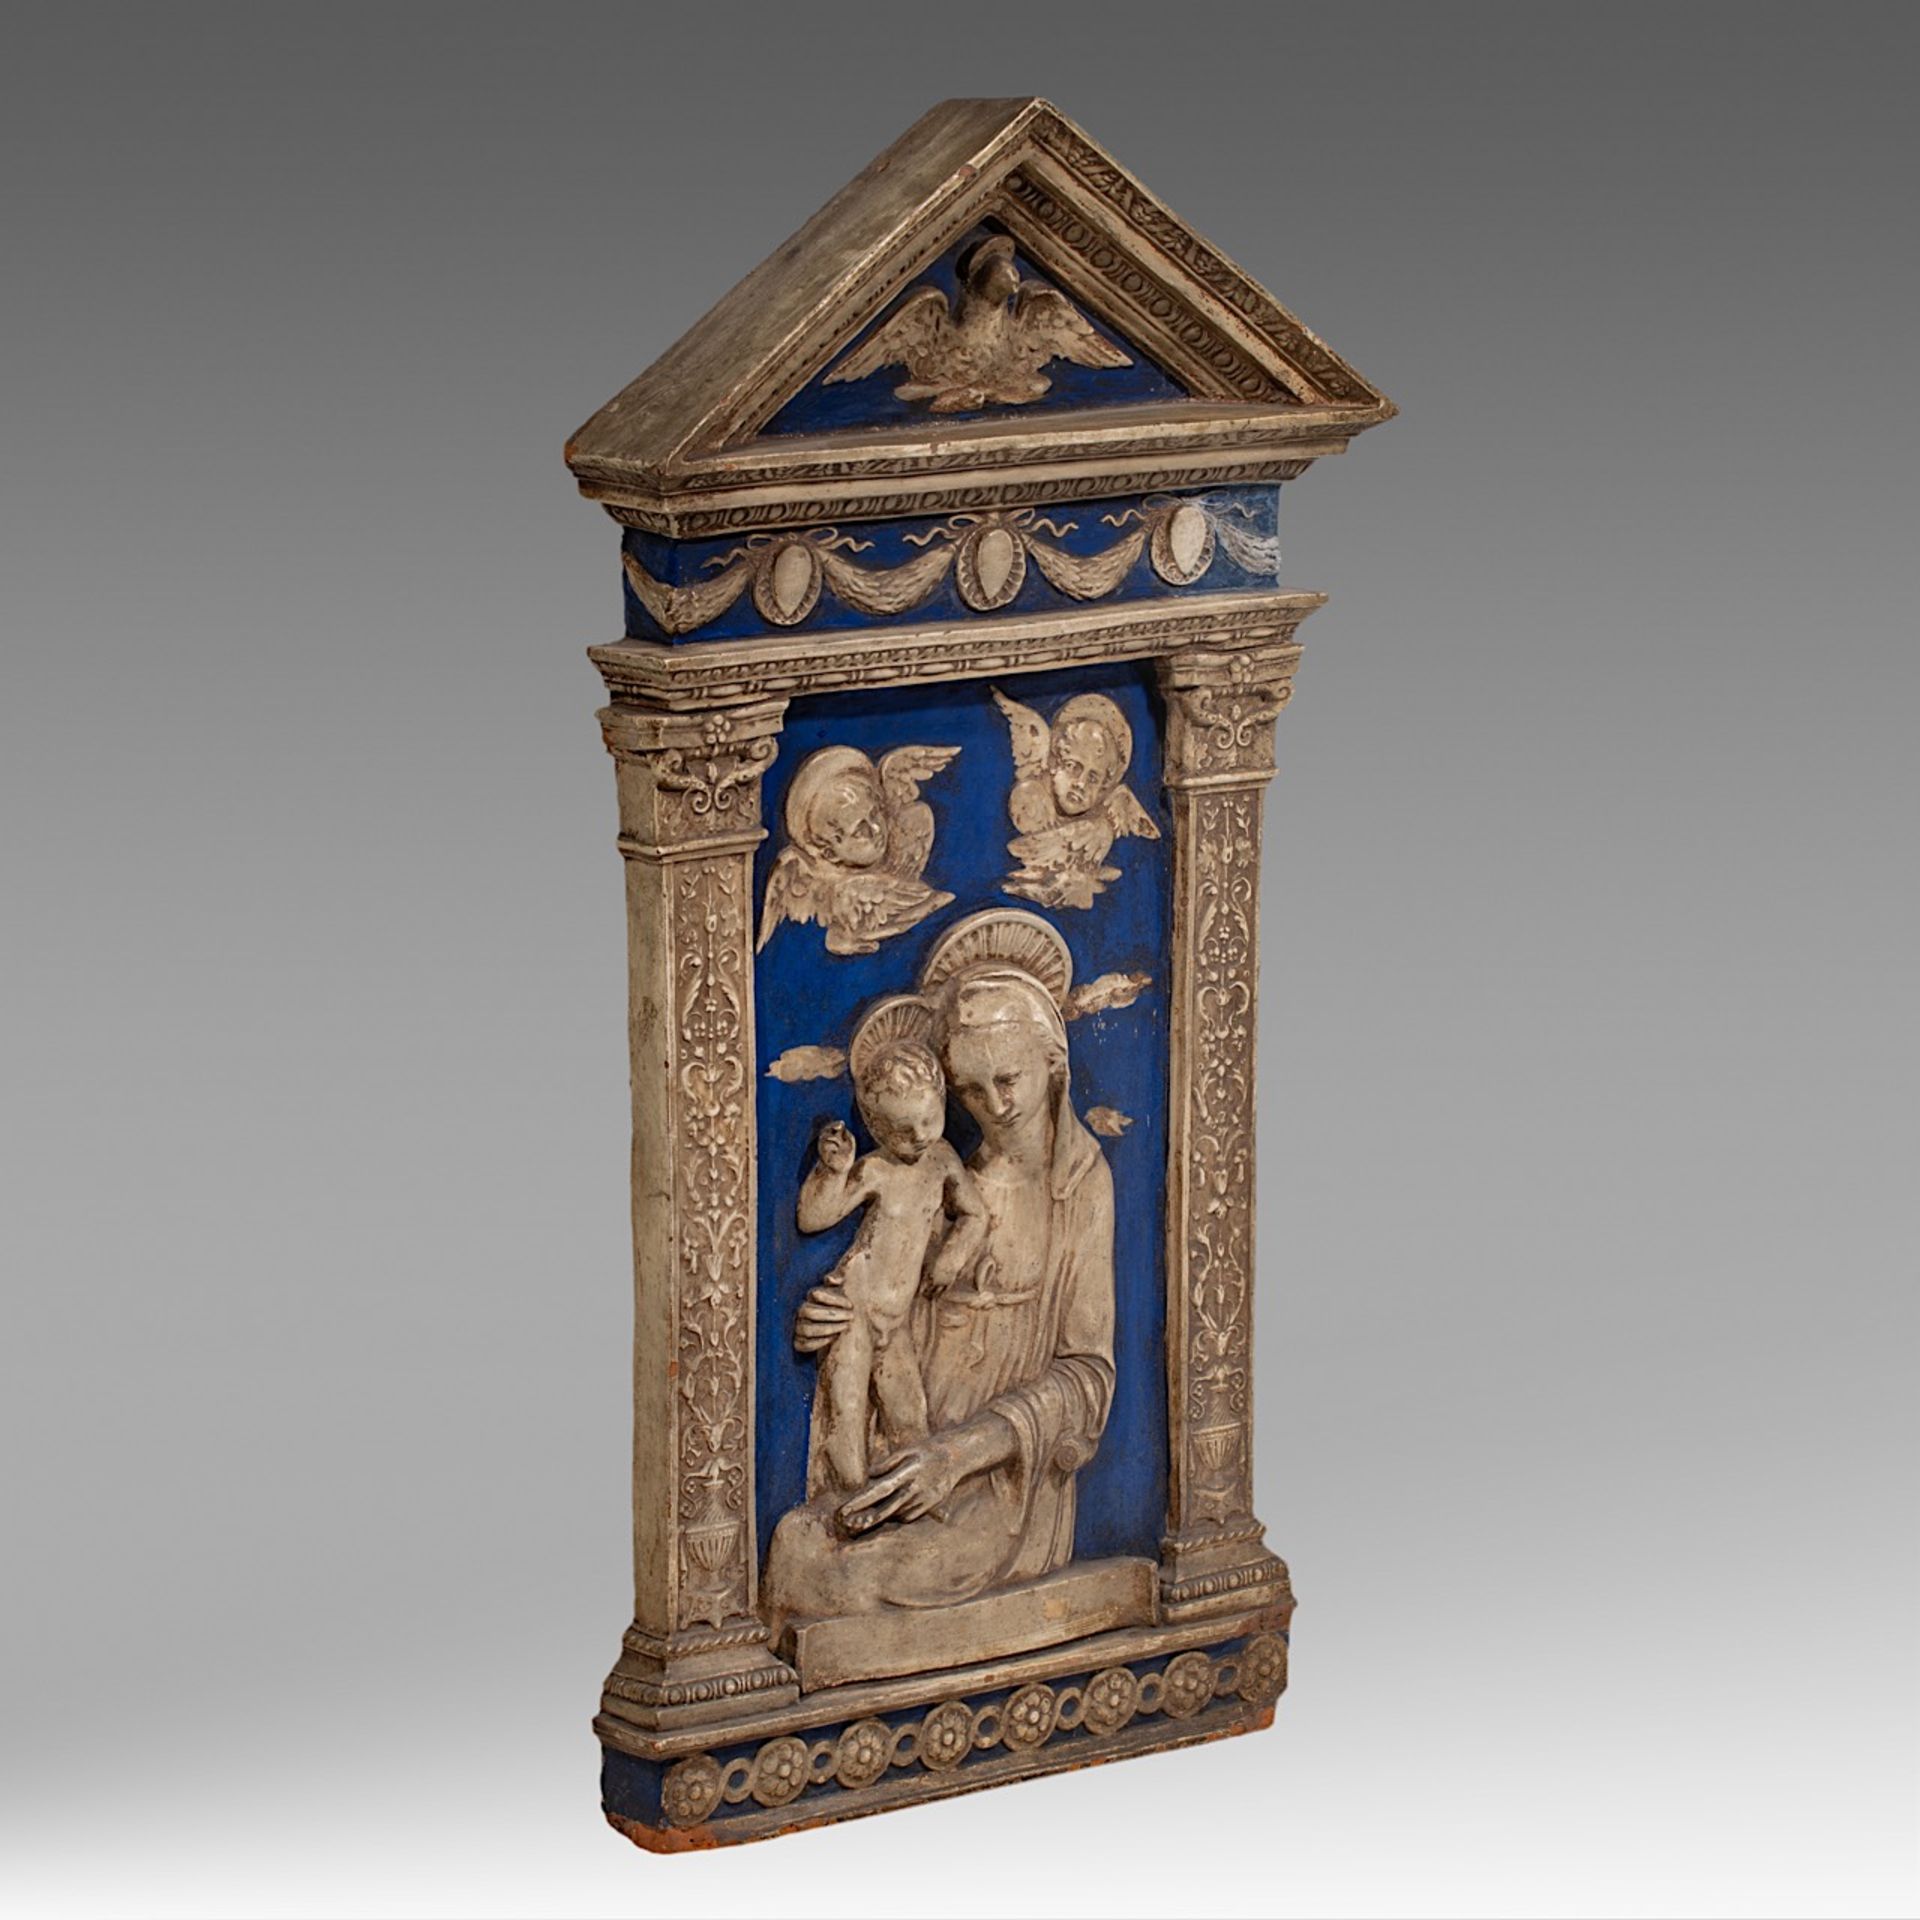 A blue and white glazed terracotta relief of the Virgin and Child in the Della Robbia manner or a fo - Bild 3 aus 6